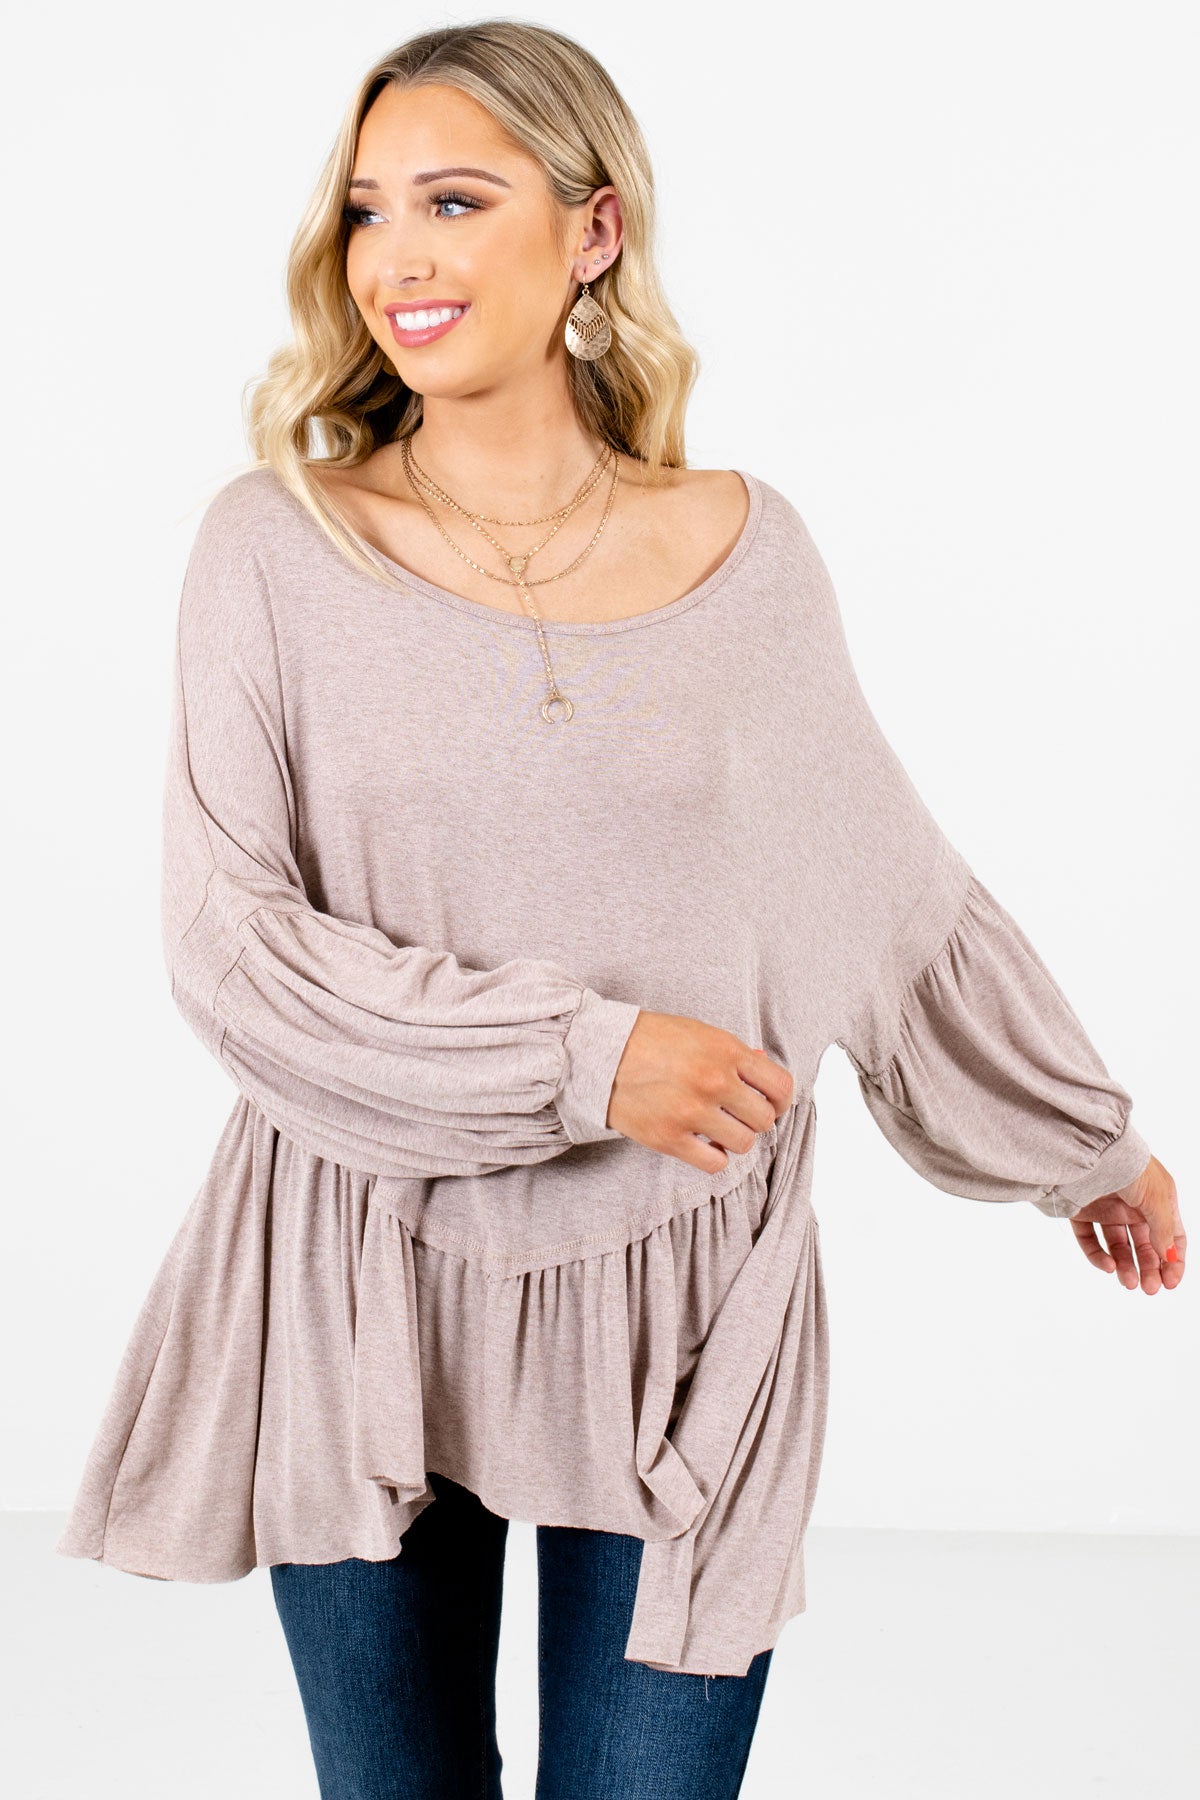 Women's Taupe Brown Flowy Silhouette Boutique Top